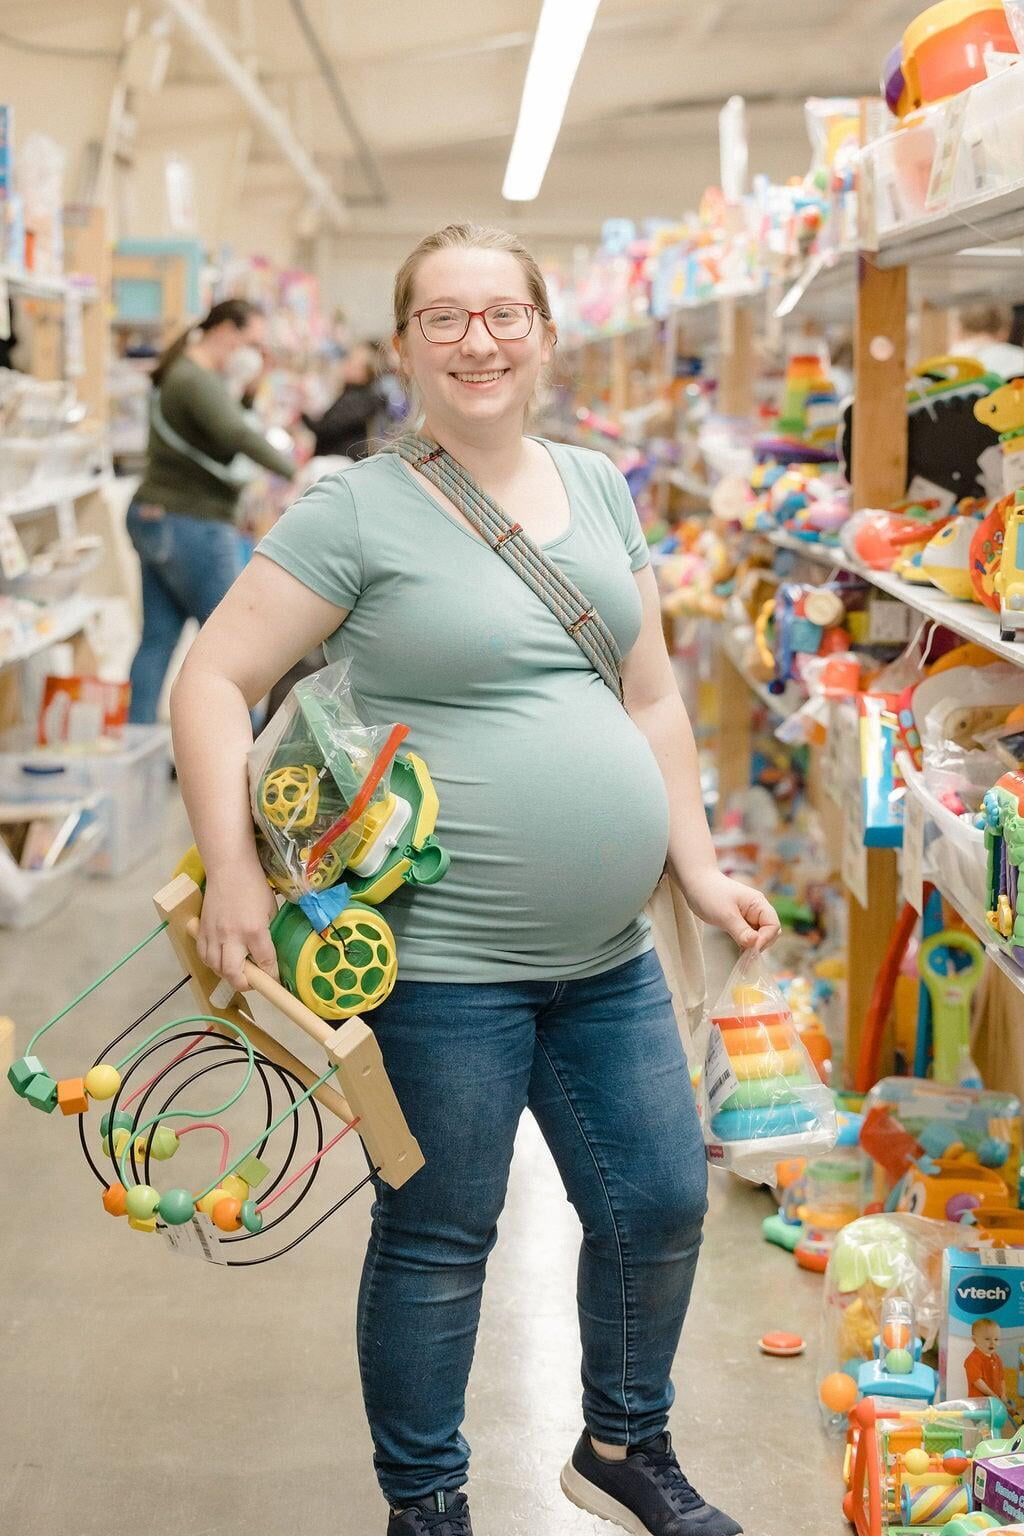 An expecting mom holding a baby seat.